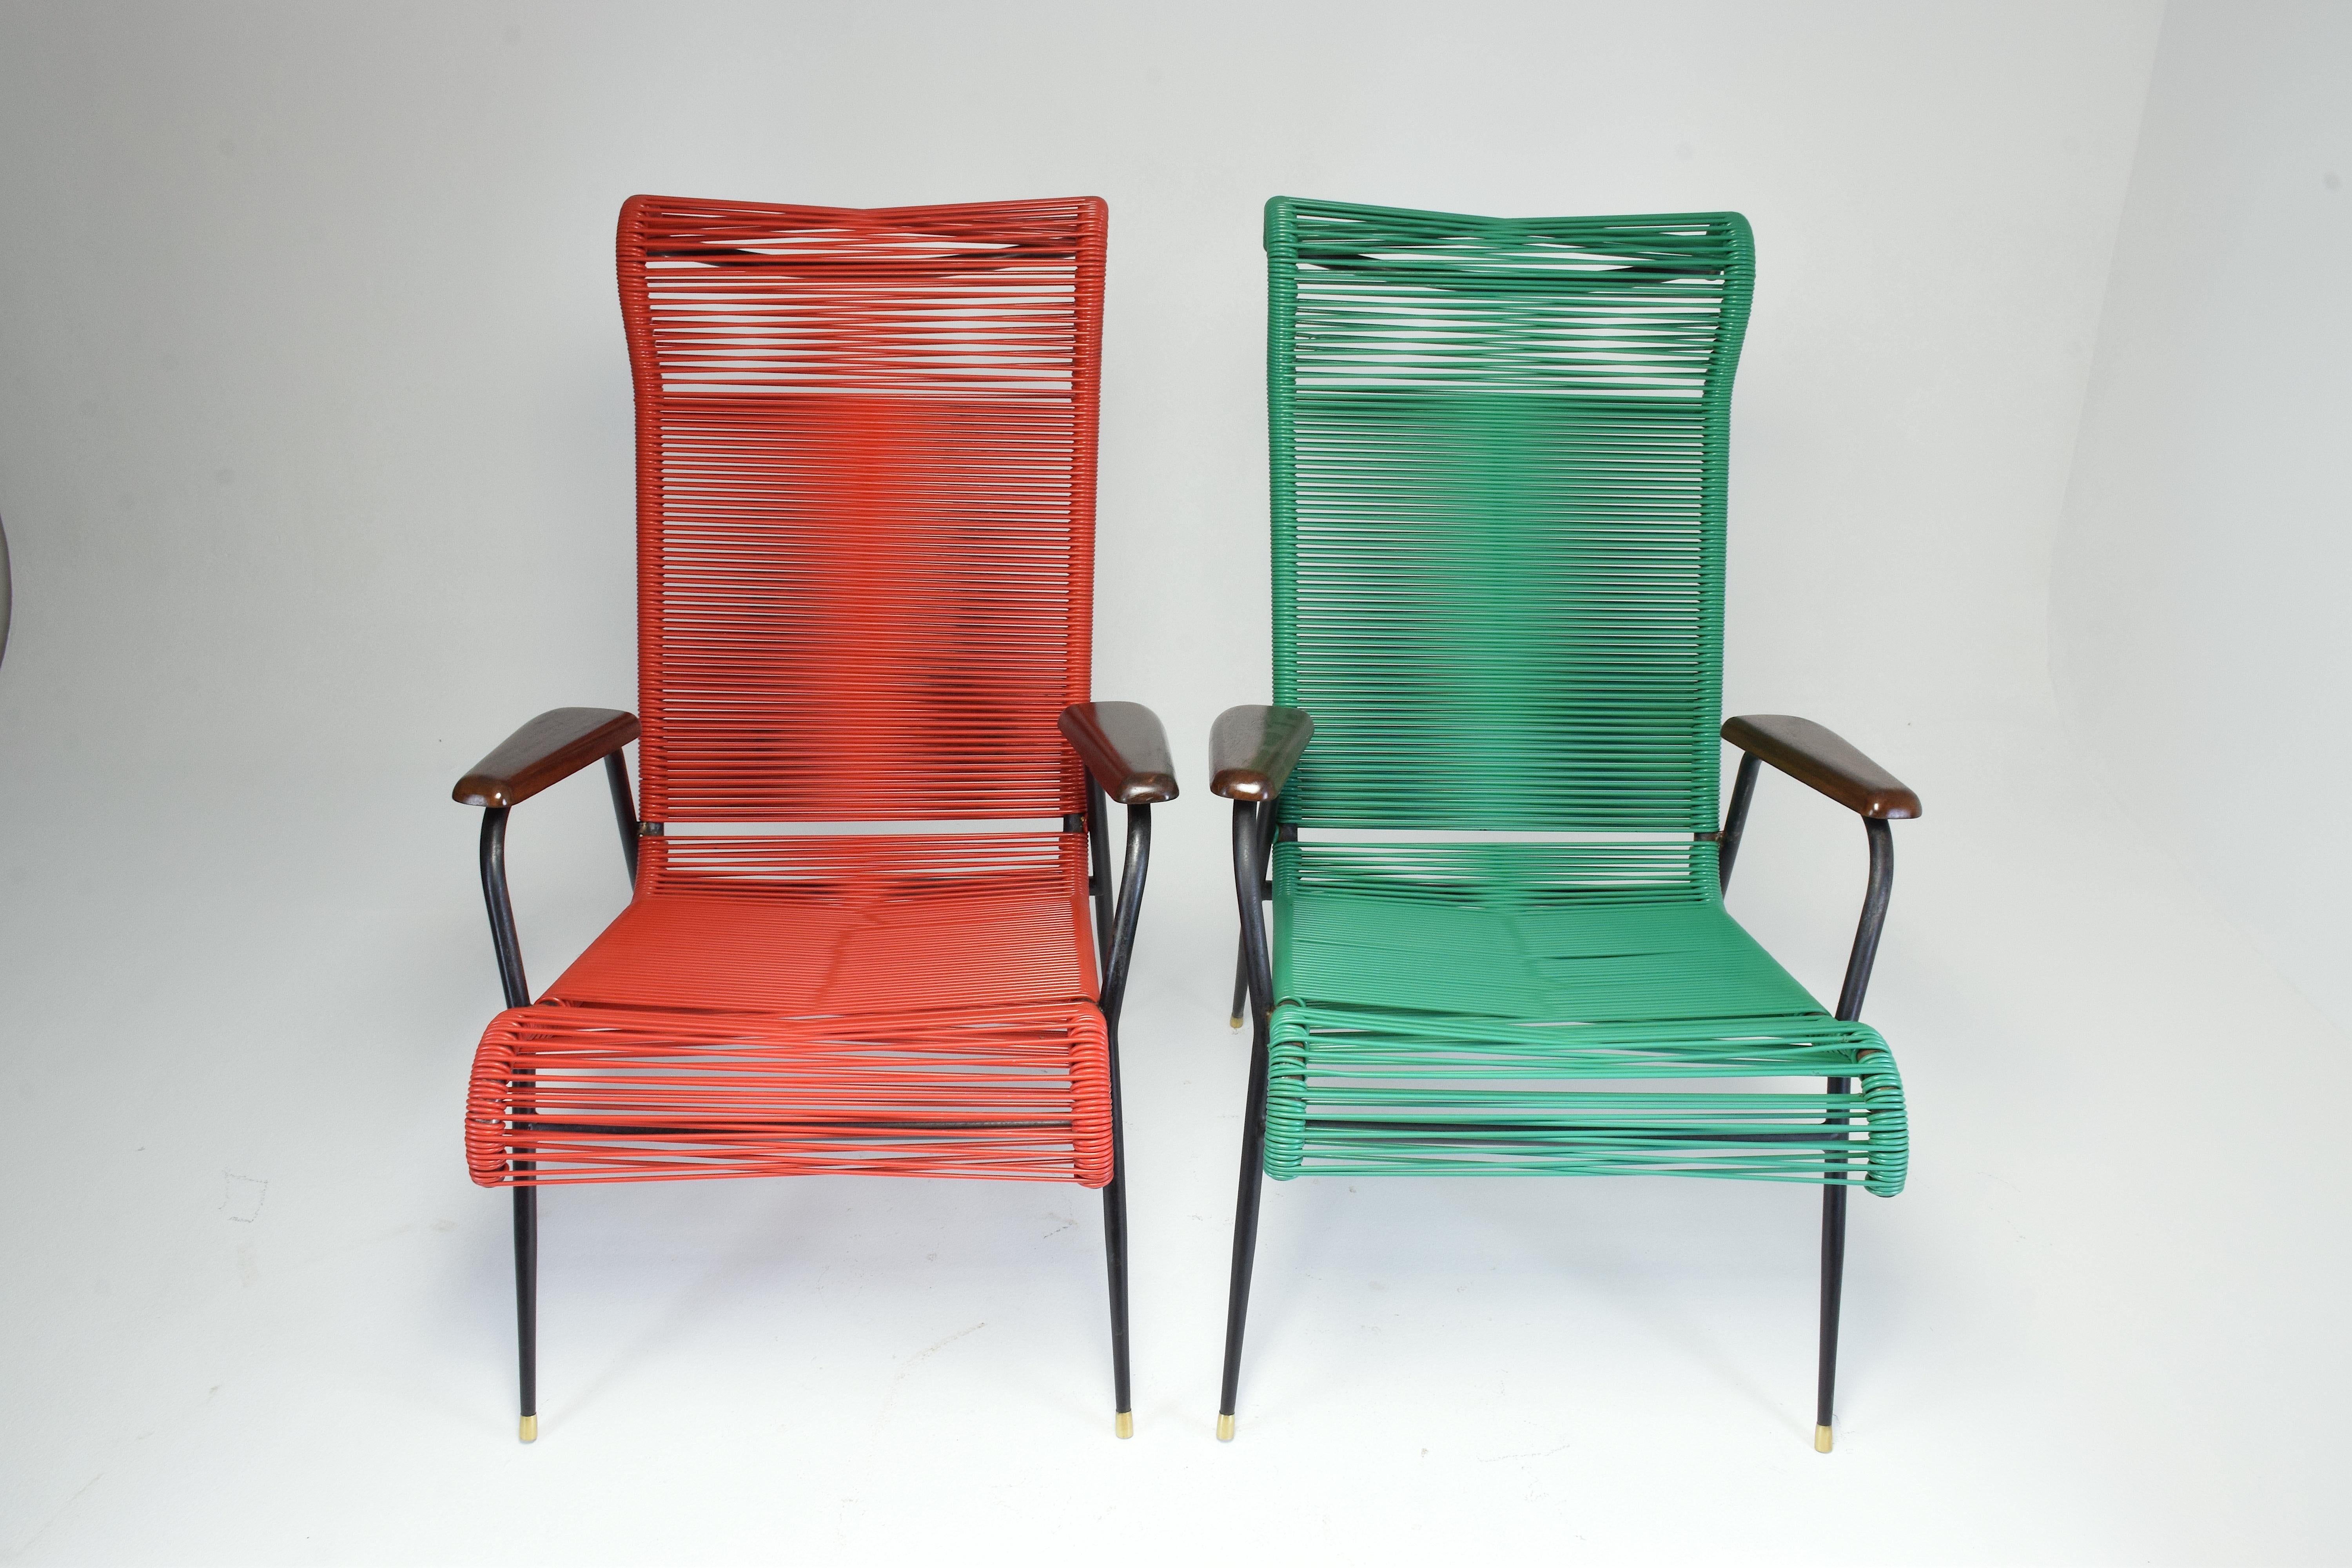 Pair of French midcentury armchairs from the 1950s made with scoubidou threads. Available in red and green, these funky vintage chairs are composed of structure steel, wrought plastic (scoubidou) seating, palisander armrests and polished brass